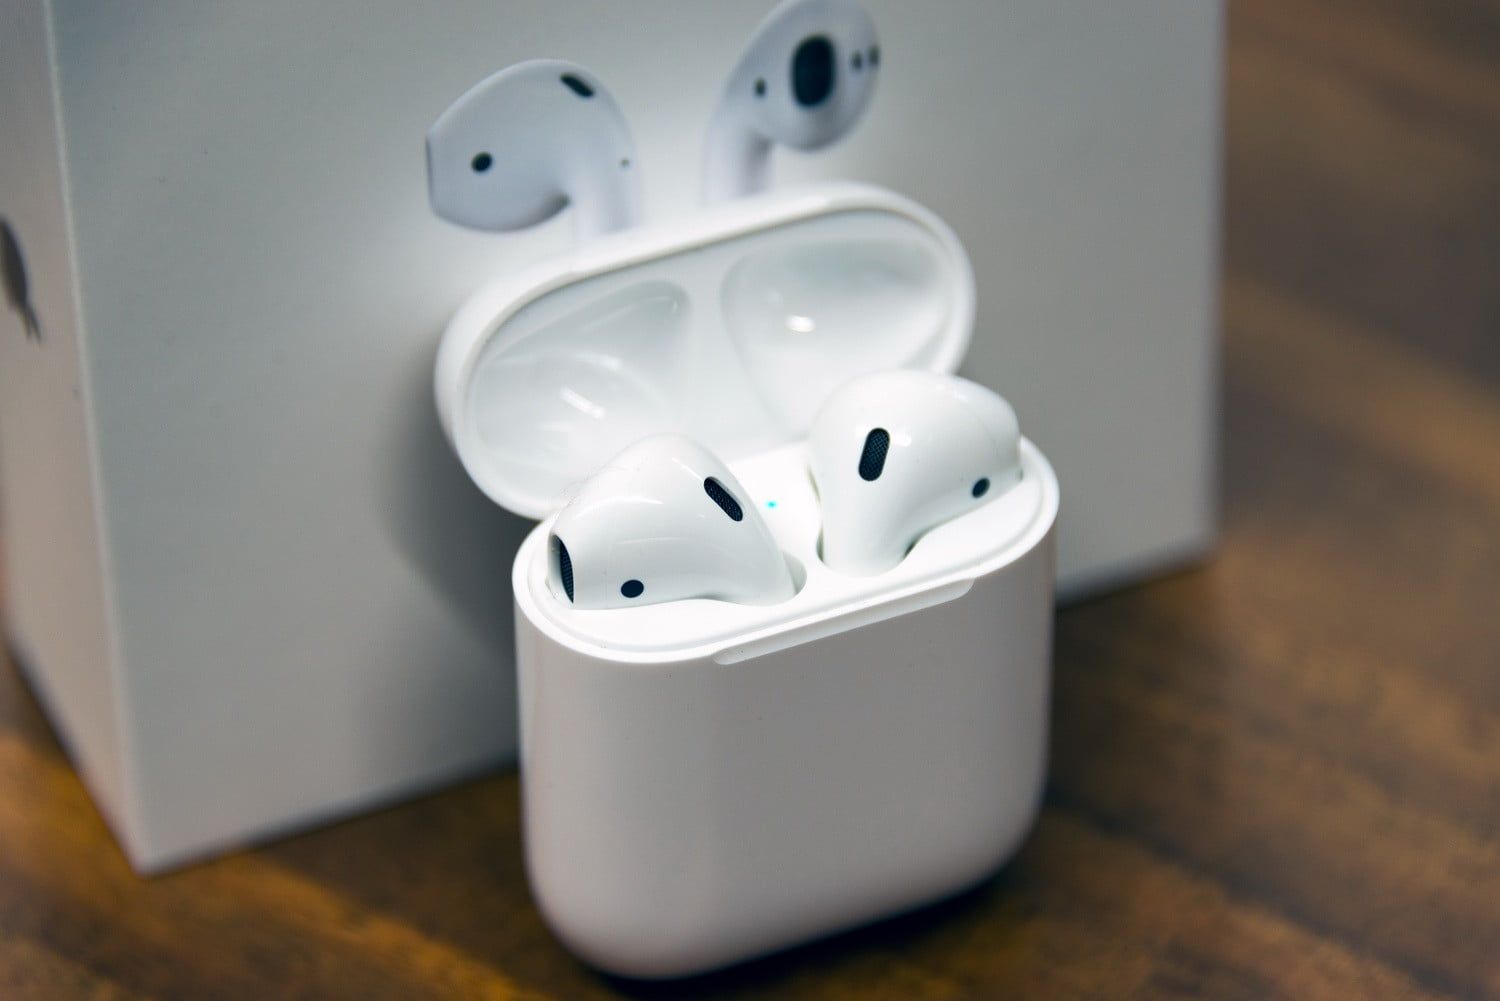 Airpods 3, Airpods Pro and Airpods Studio will arrive in 2021